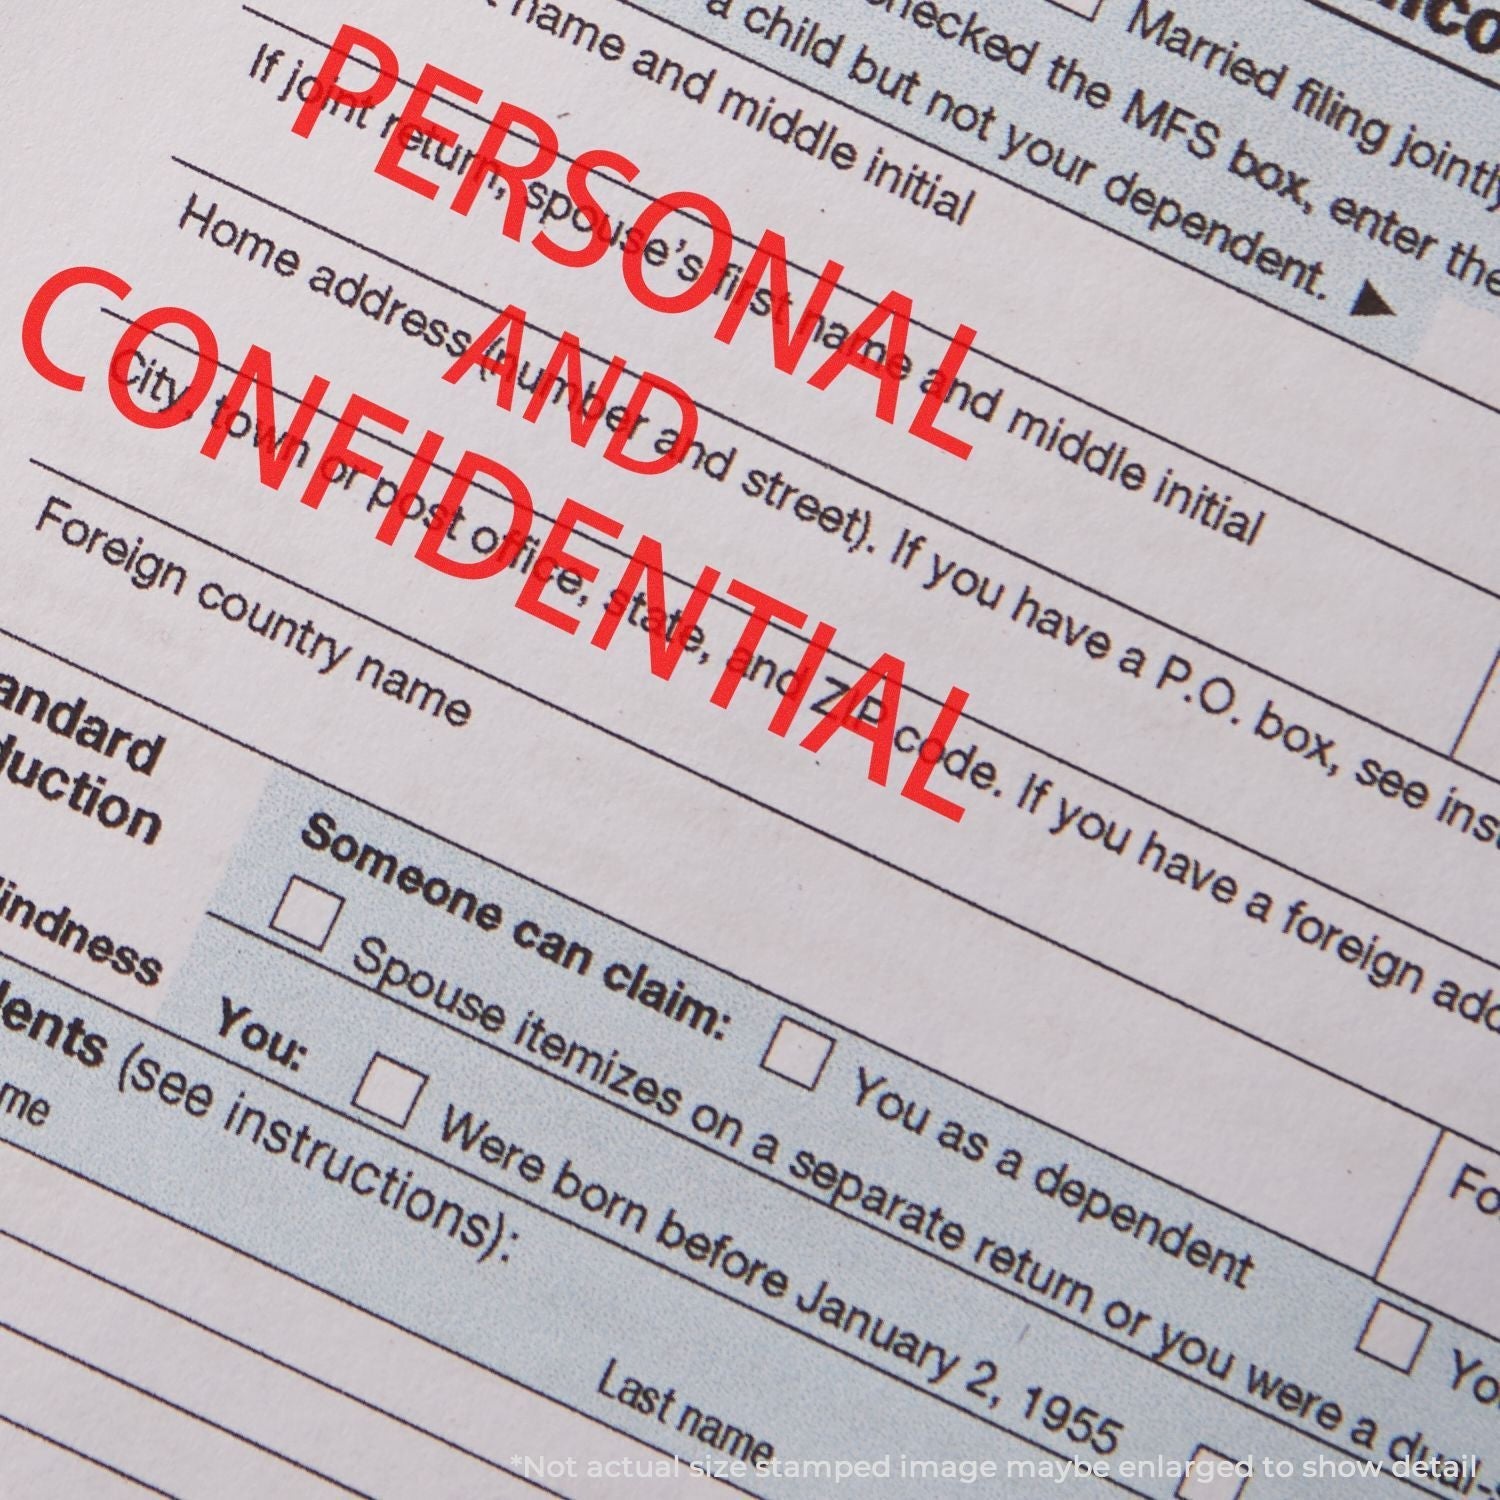 A self-inking stamp with a stamped image showing how the text "PERSONAL AND CONFIDENTIAL" is displayed after stamping.